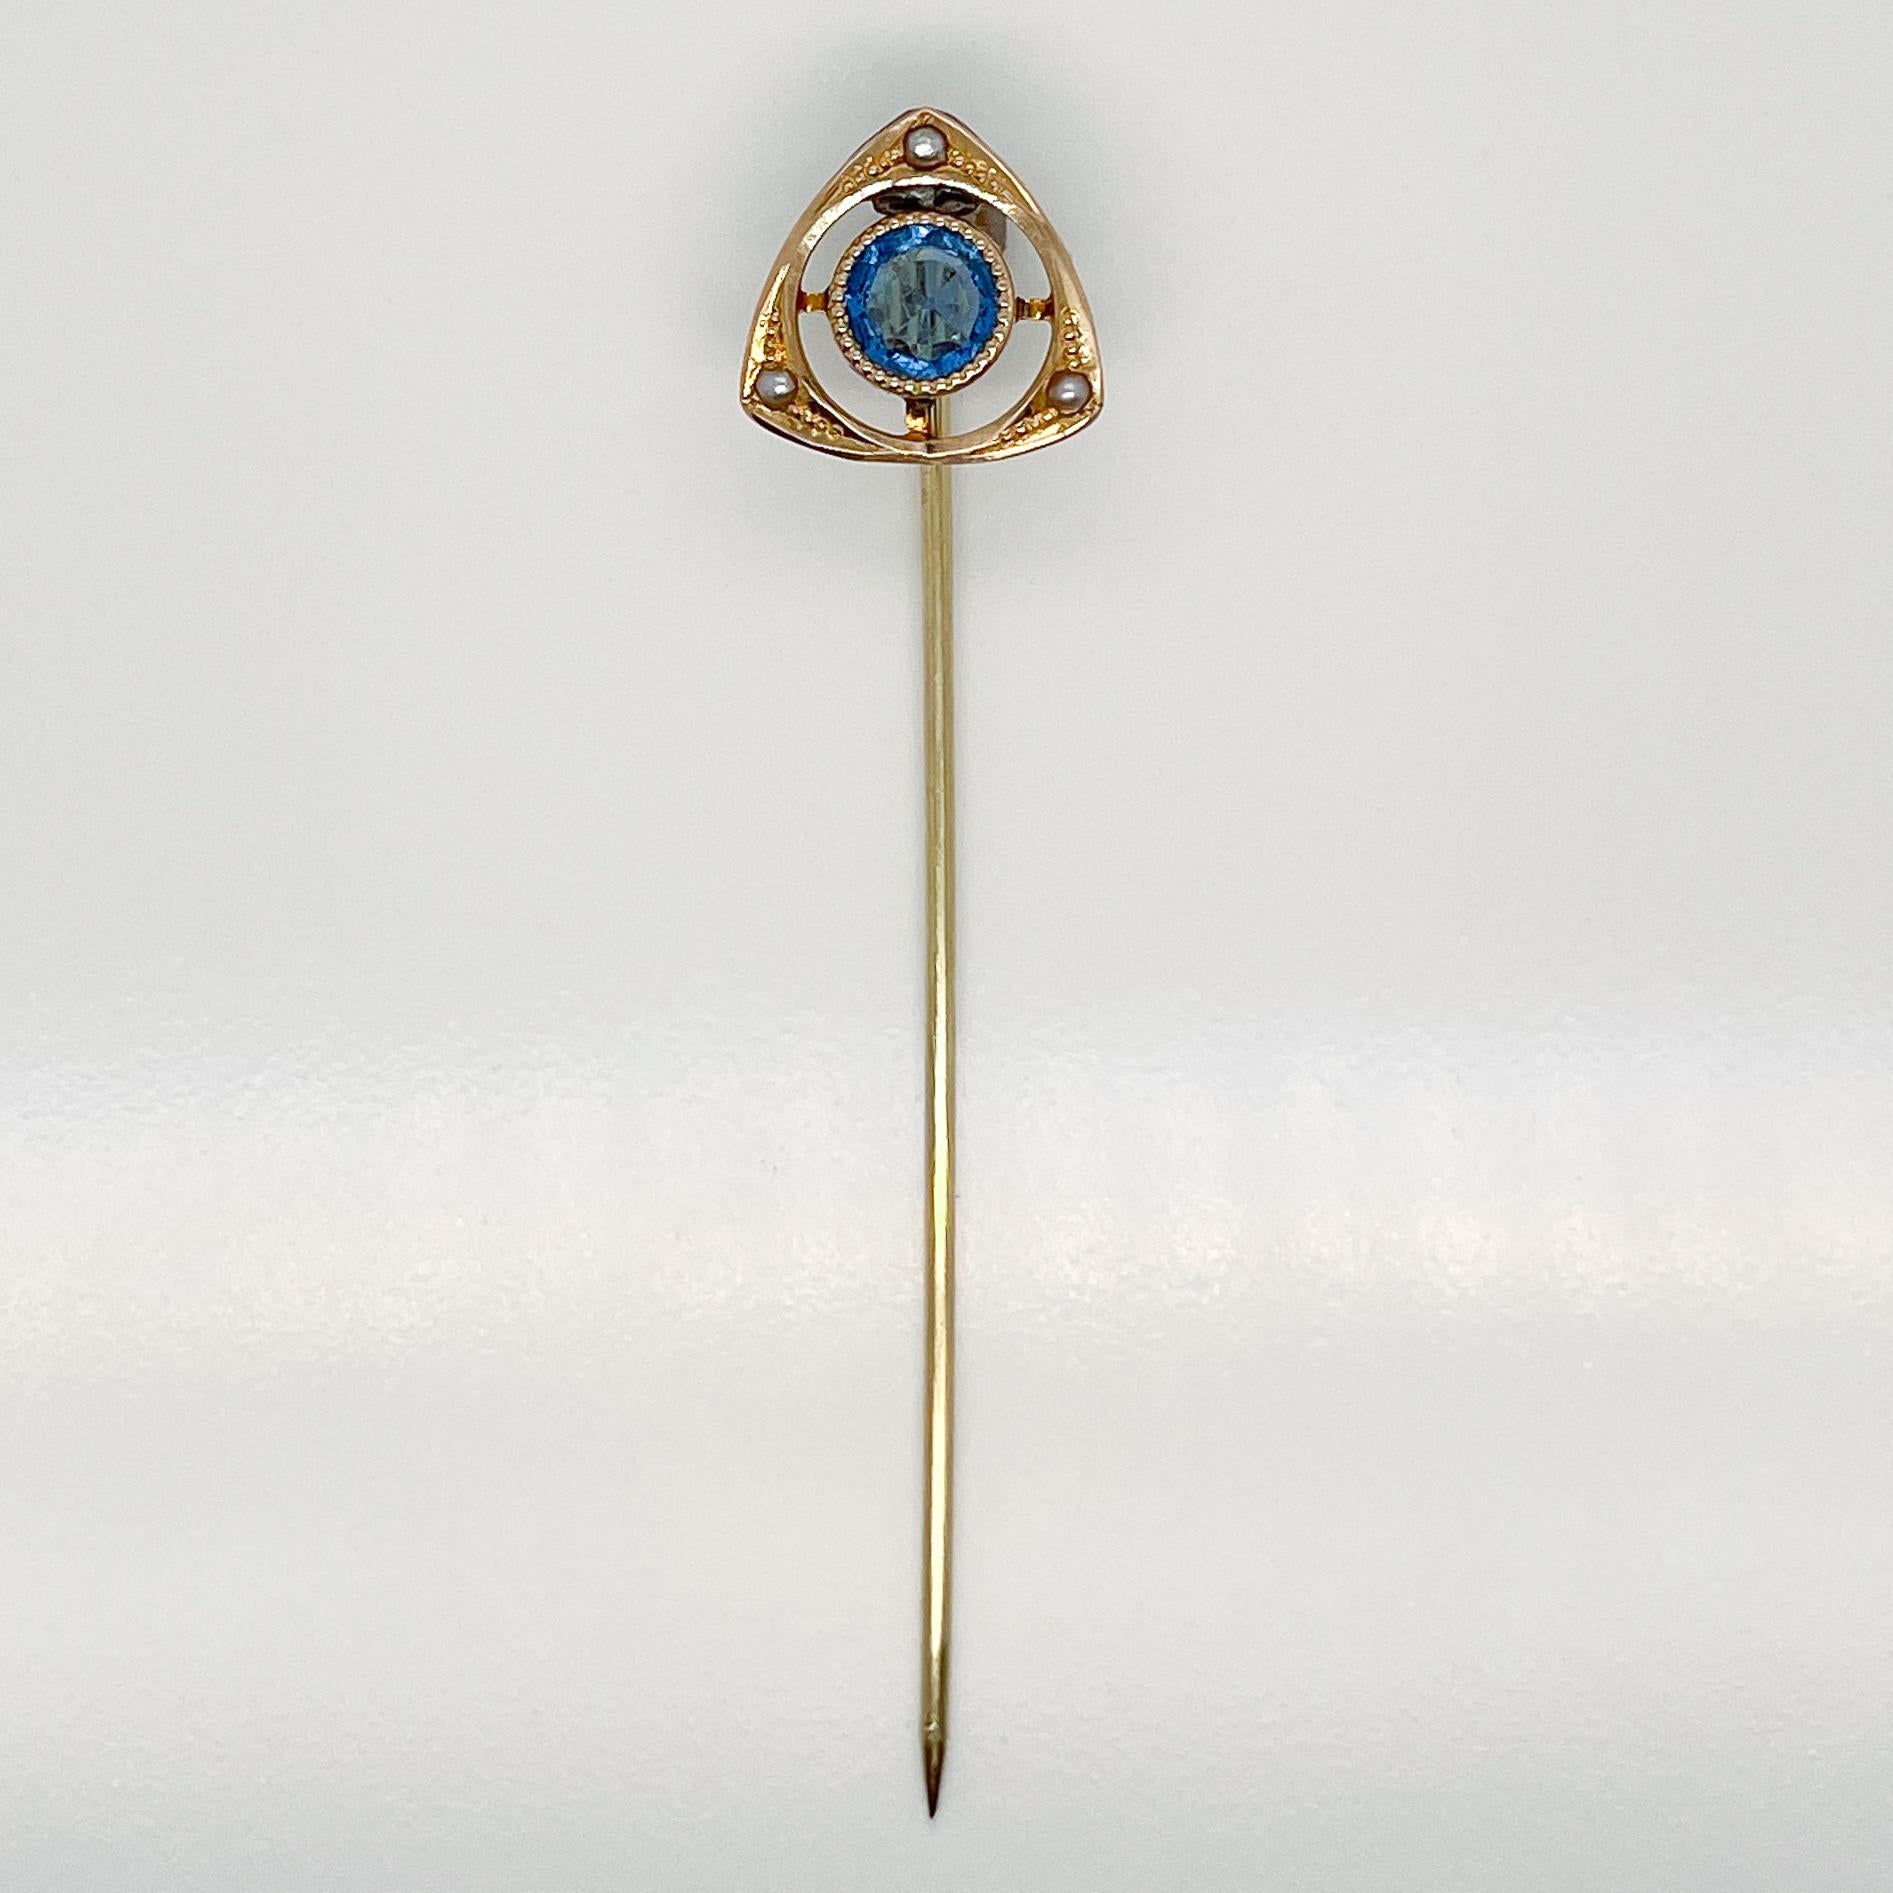 A very fine Late Victorian 14k gold, glass cabochon and seed pearl stick pin.

With a round blue glass cabochon at the center of 14k gold triangular head and framed by three seed pearls flush set on each corner set on a later 14k pin stem.

Simply a